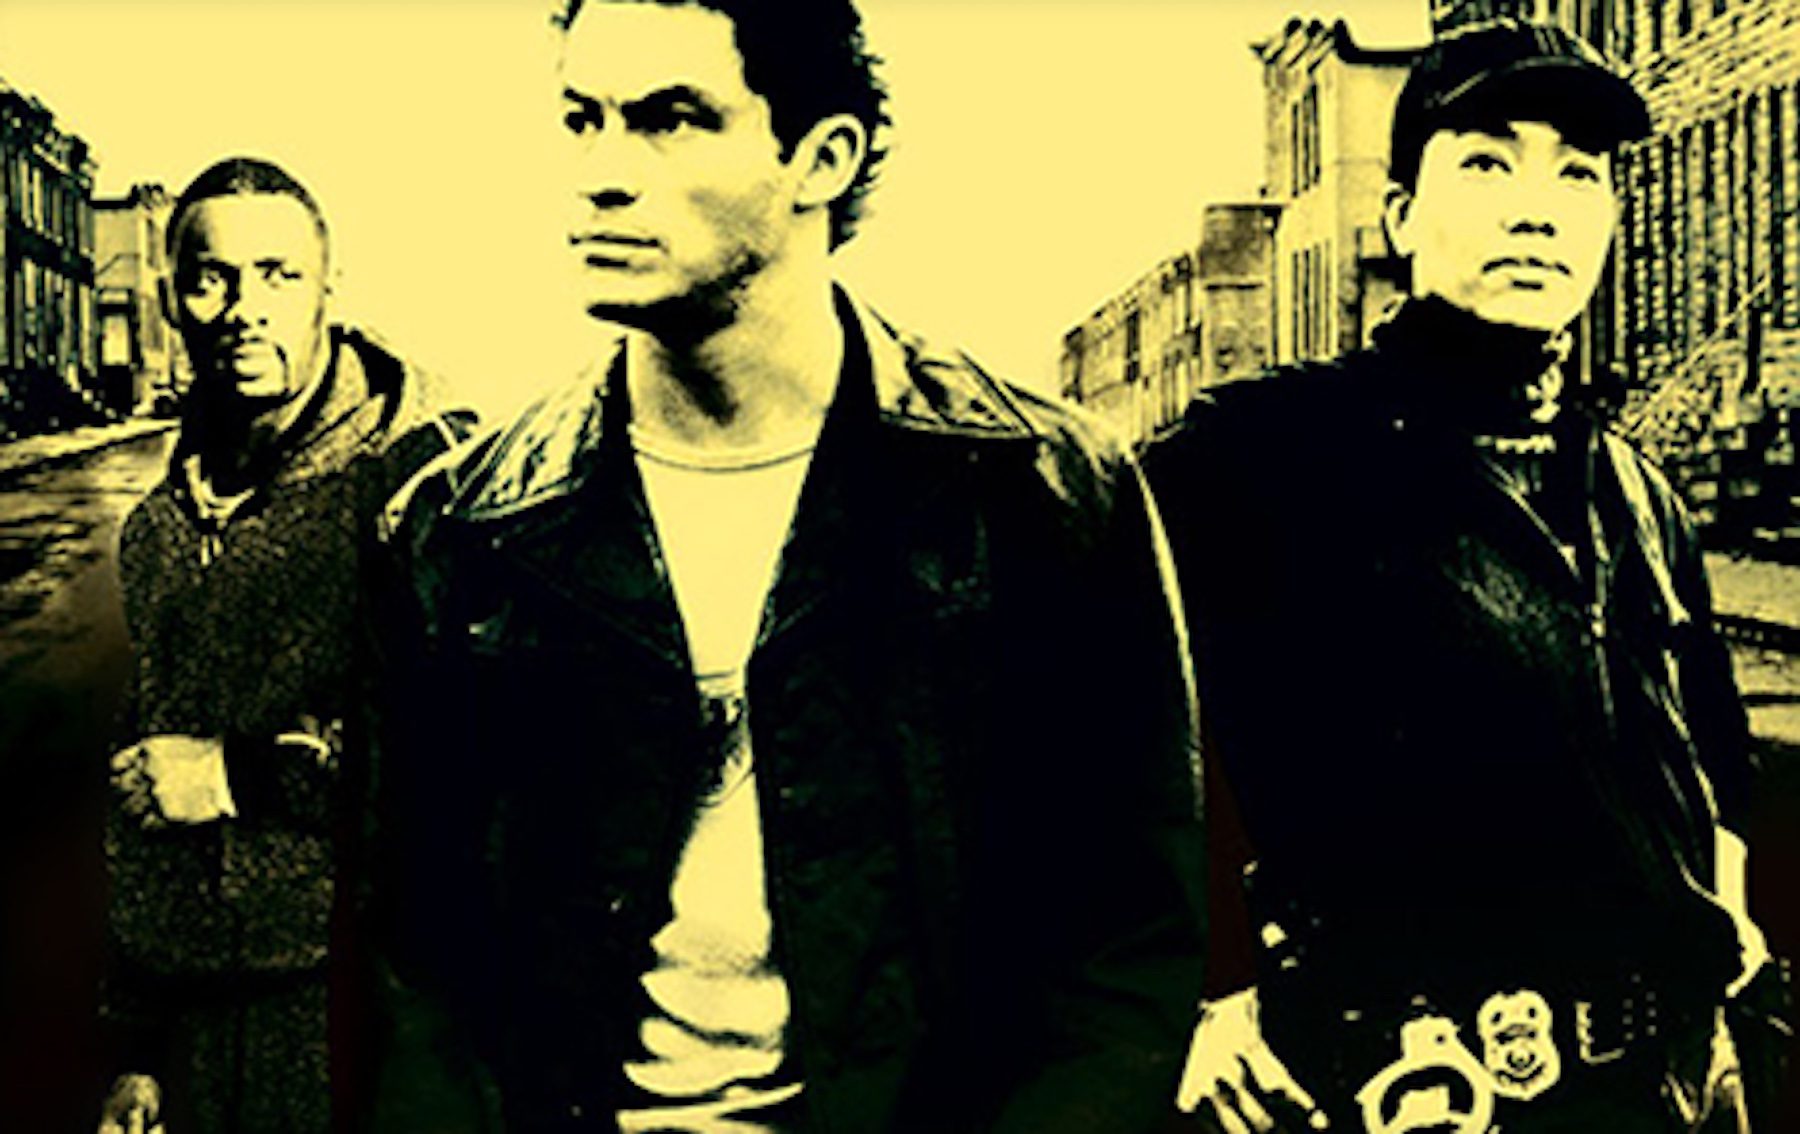 Yellow and black illustration of cast of The Wire against urban background. 